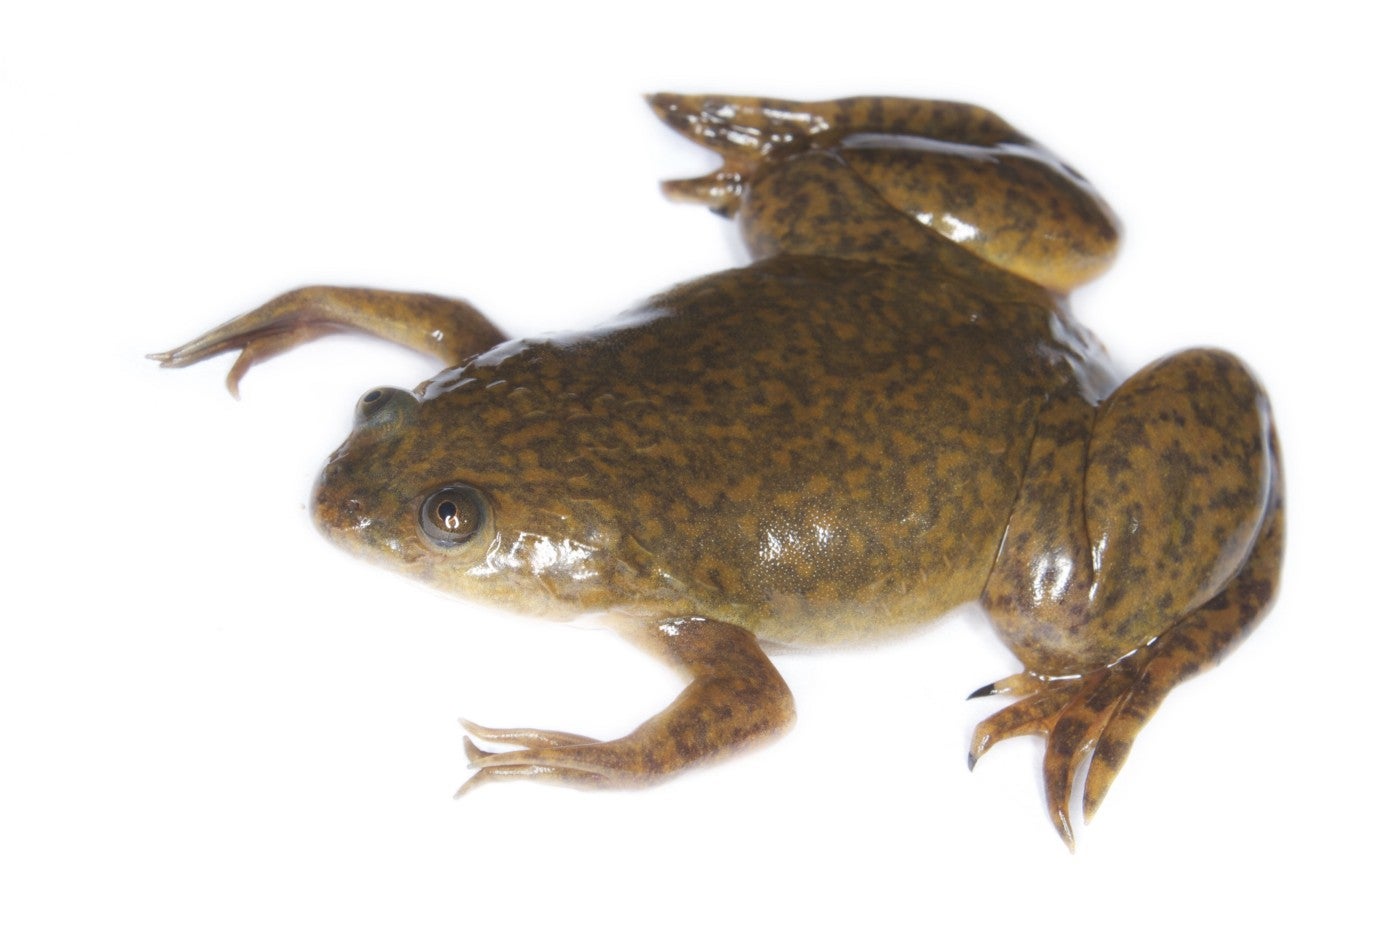 African Clawed Frogs Invade Washington State